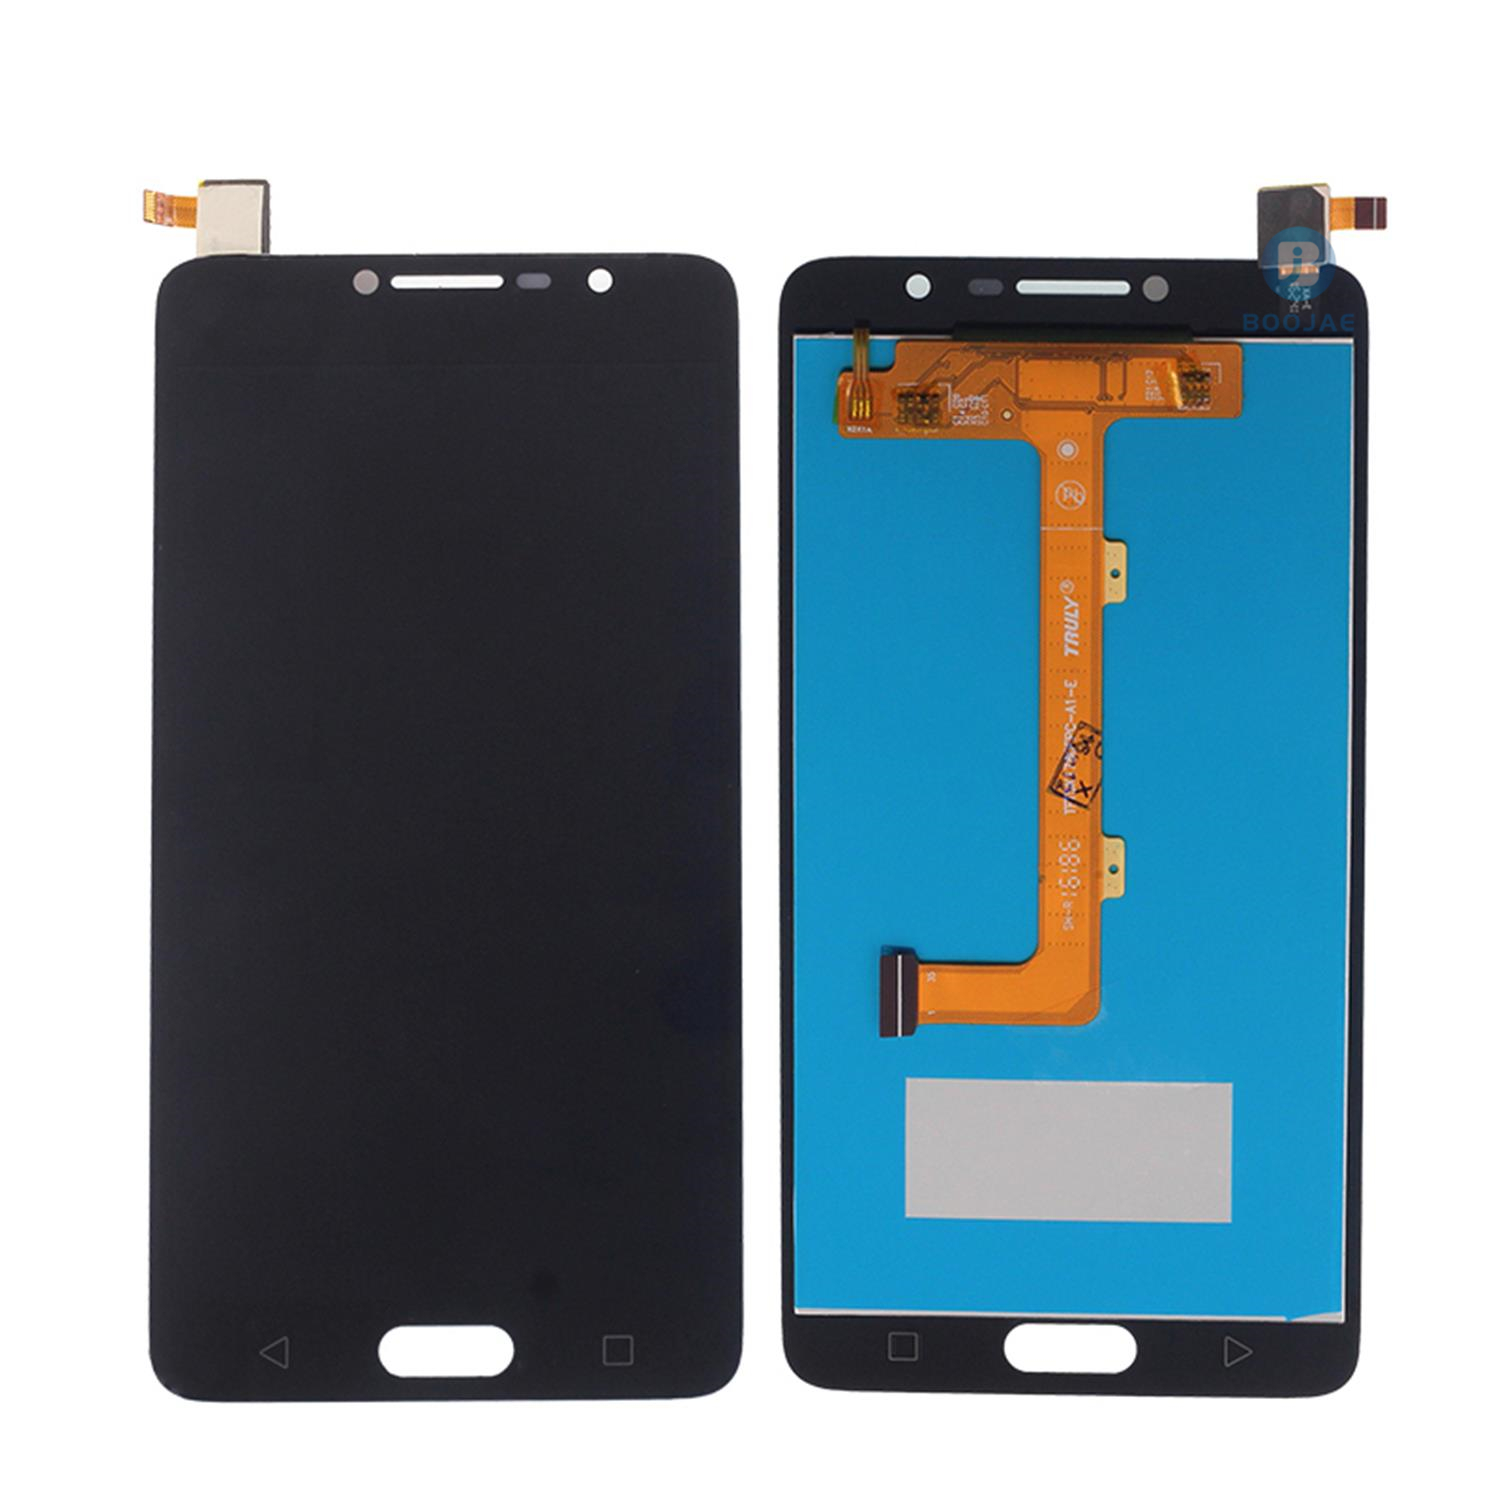 Alcatel 5095 LCD Screen Display, Lcd Assembly Replacement